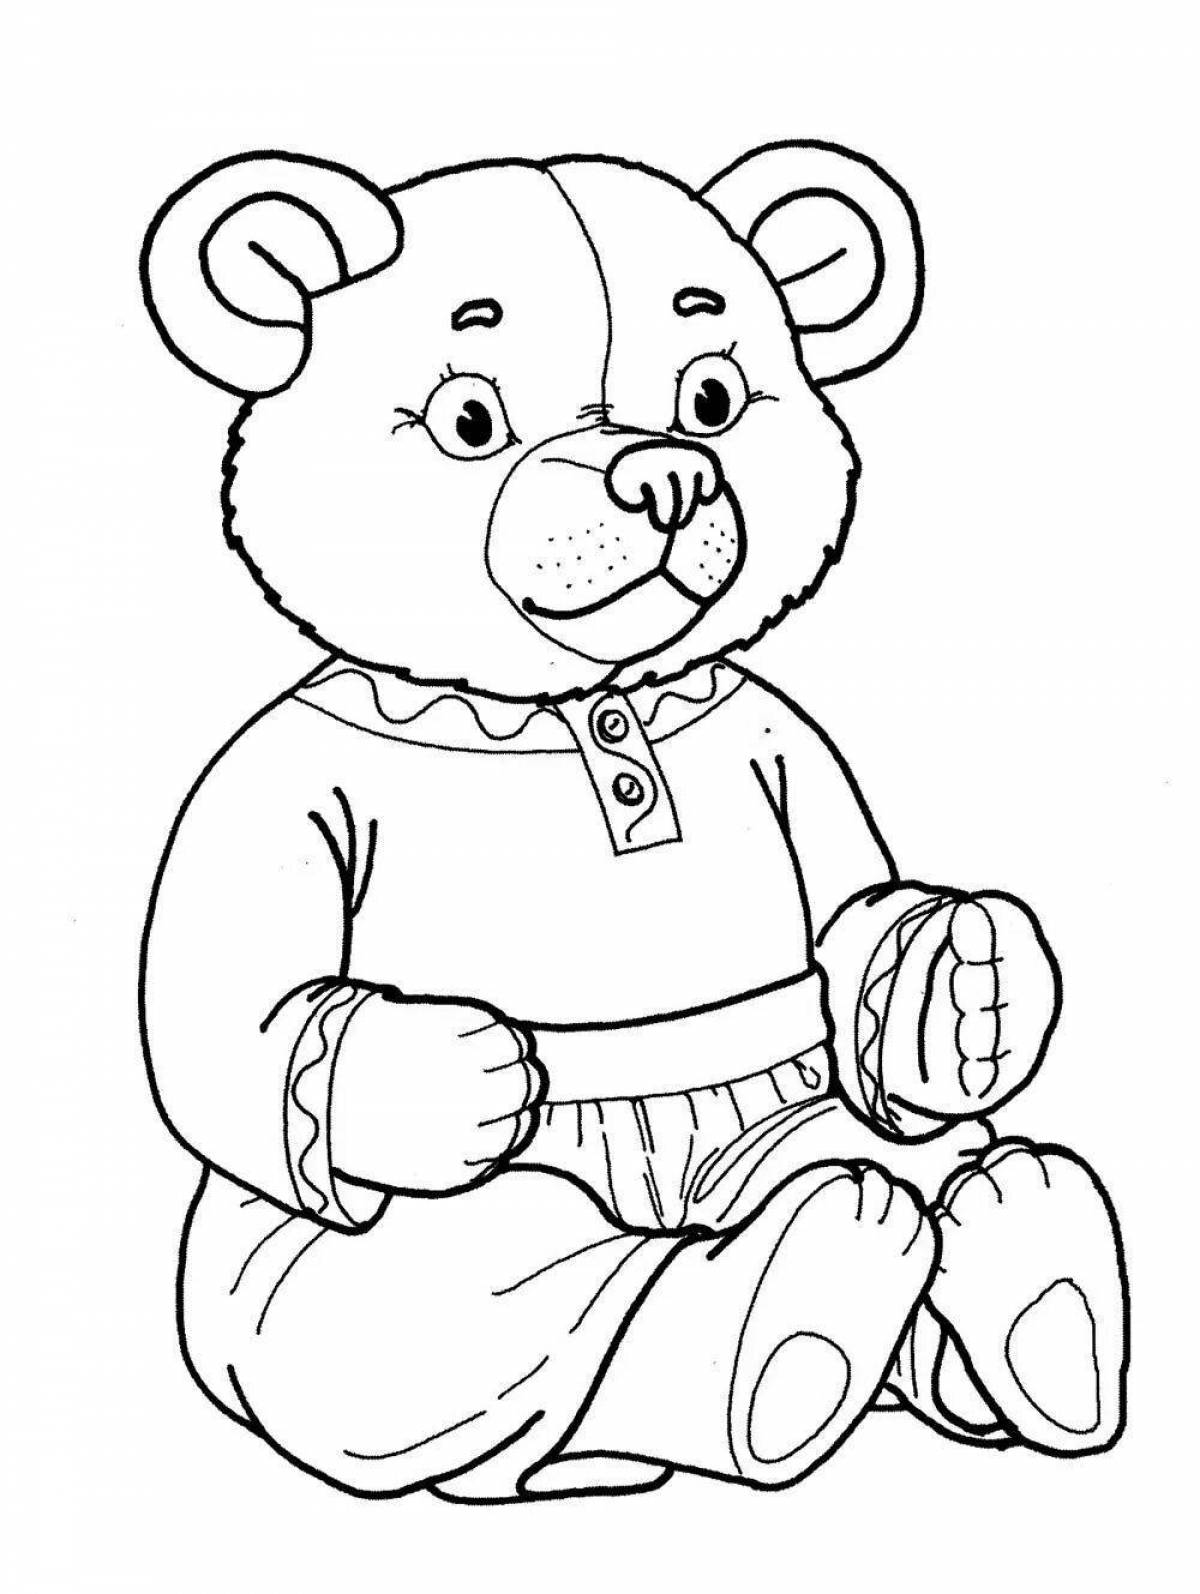 Fancy coloring clumsy bear